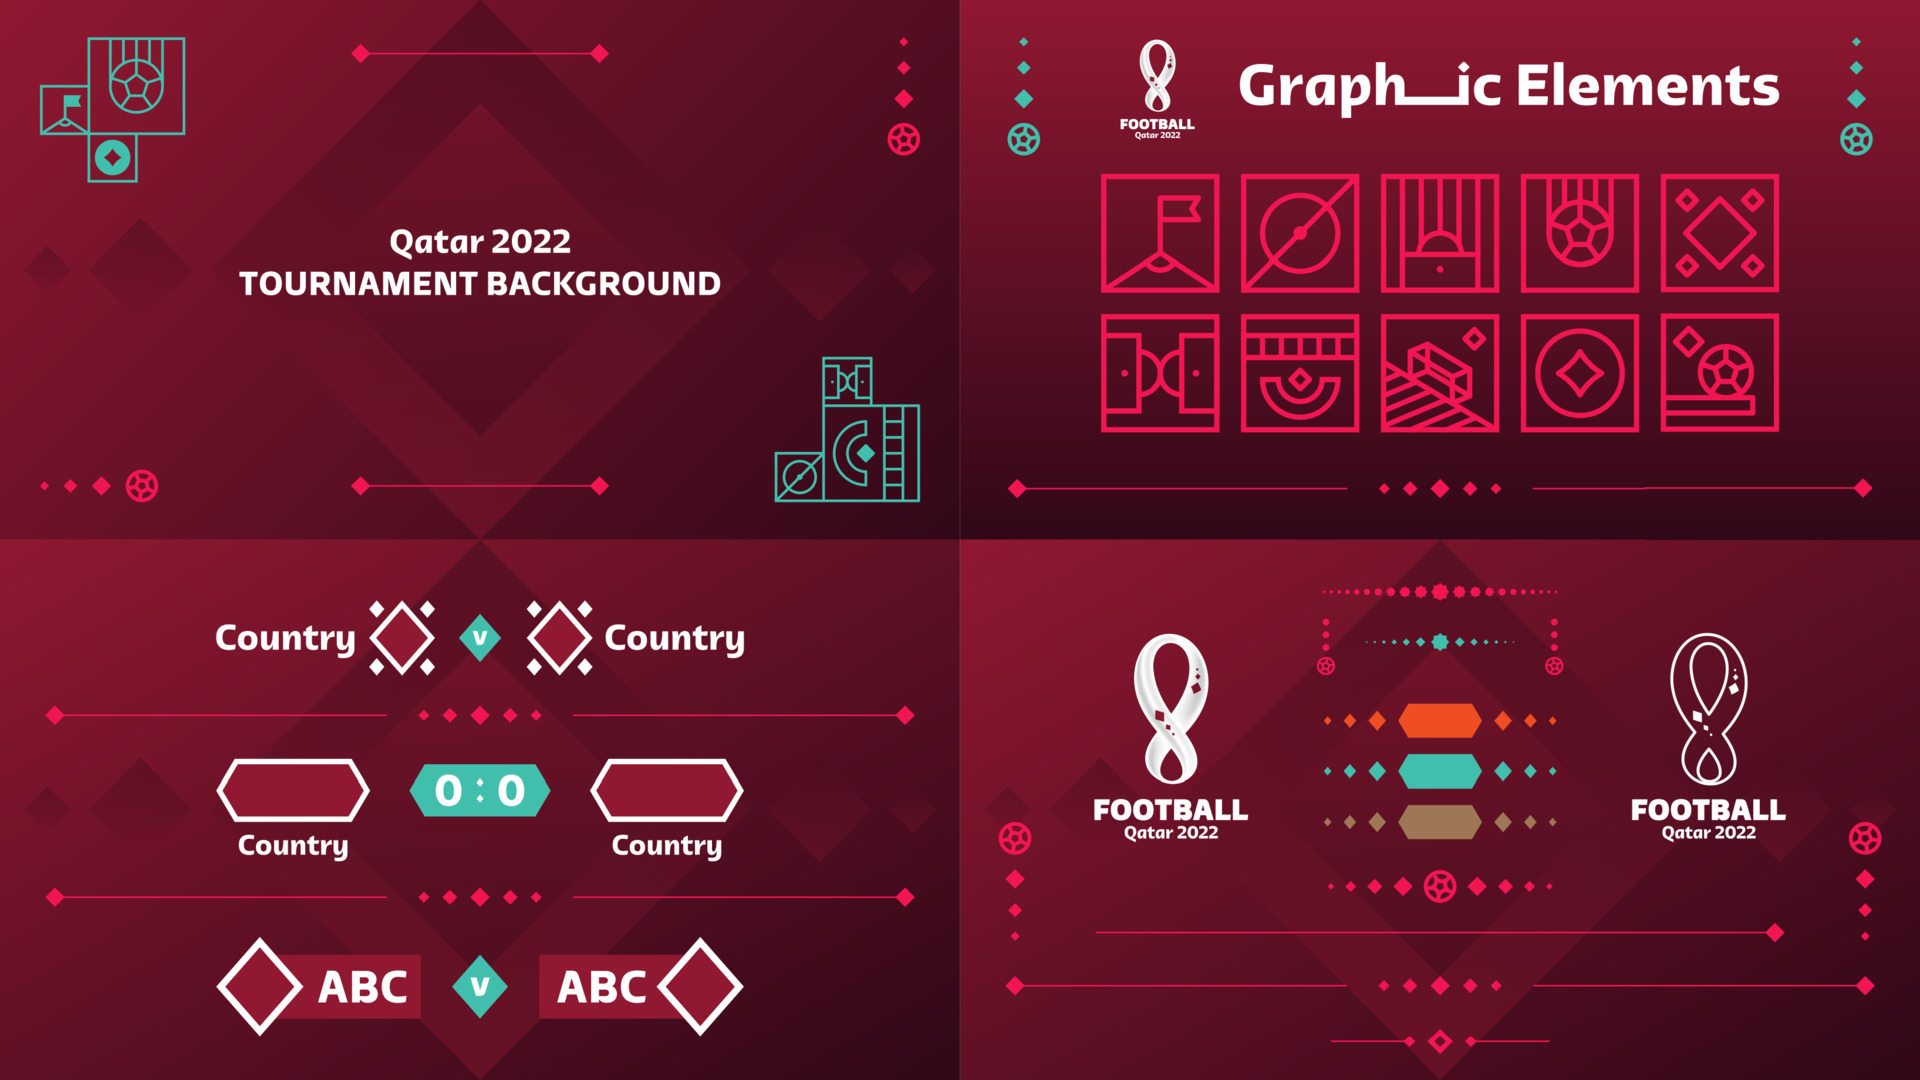 Qatar 2022 Football or Soccer Championship design elements vector set. Qatar 2022 official color background with logo. Vectors, Banners, Posters, Social Media kit, , scoreboard